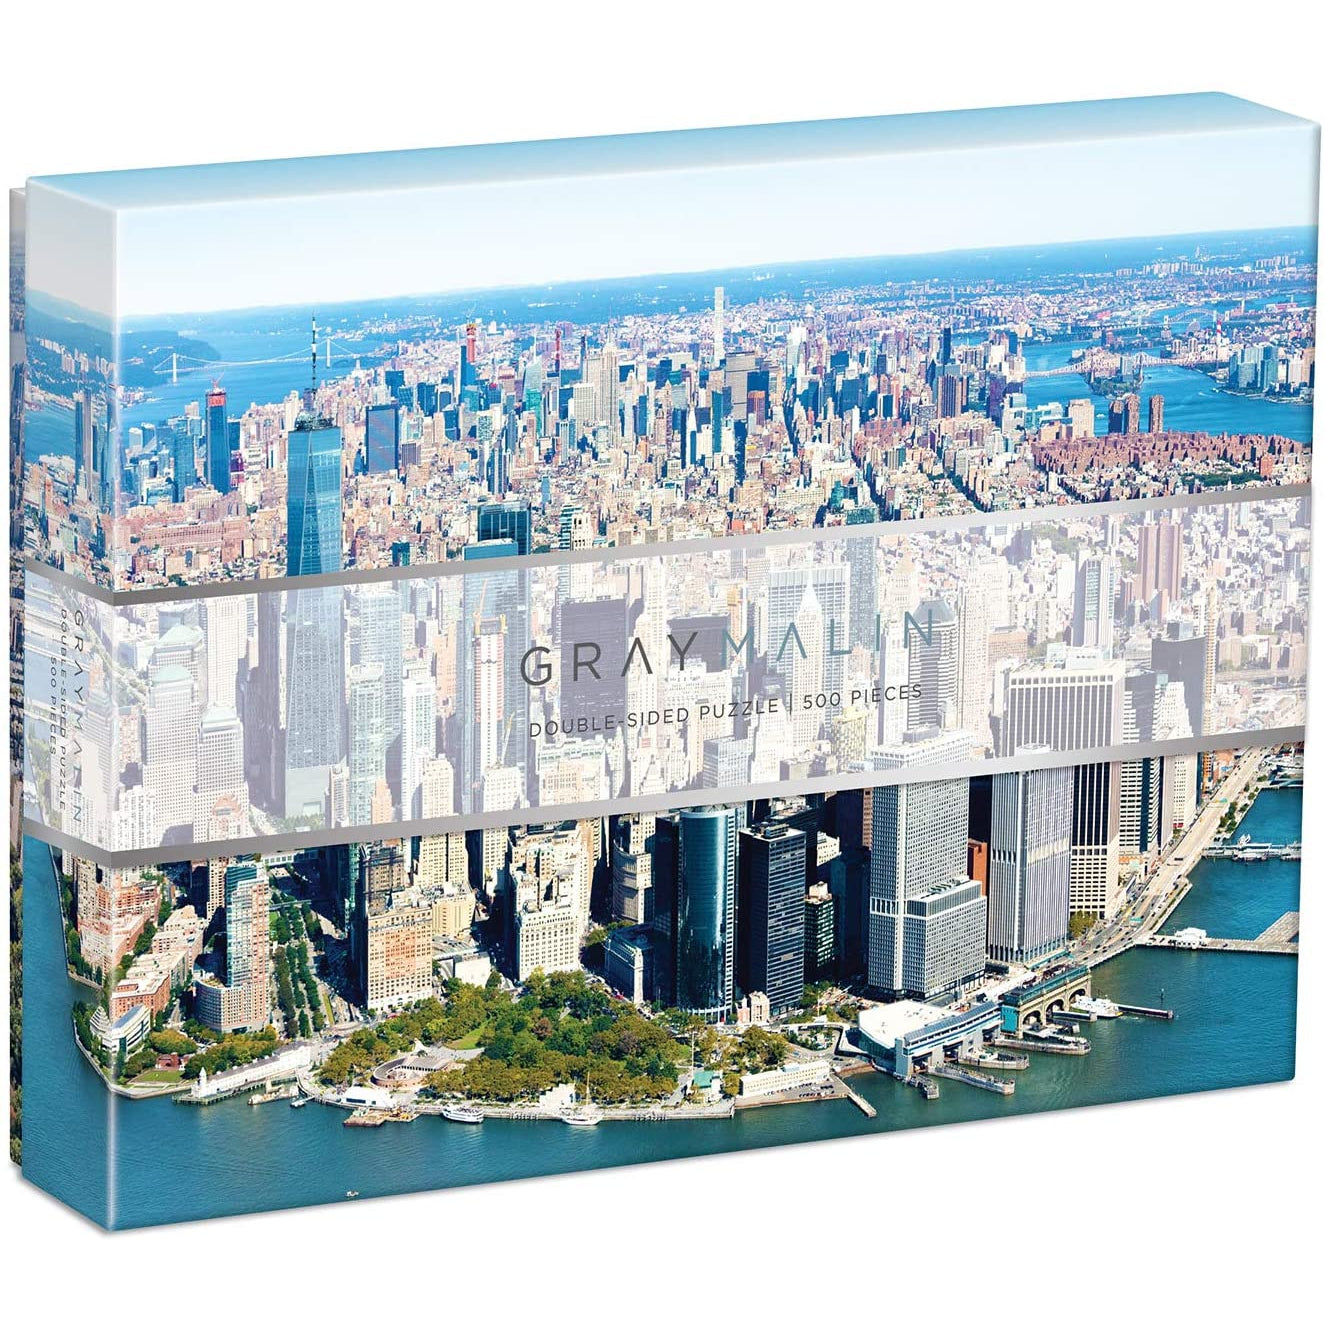 Gray Malin: New York City 500 Piece Double Sided Puzzle